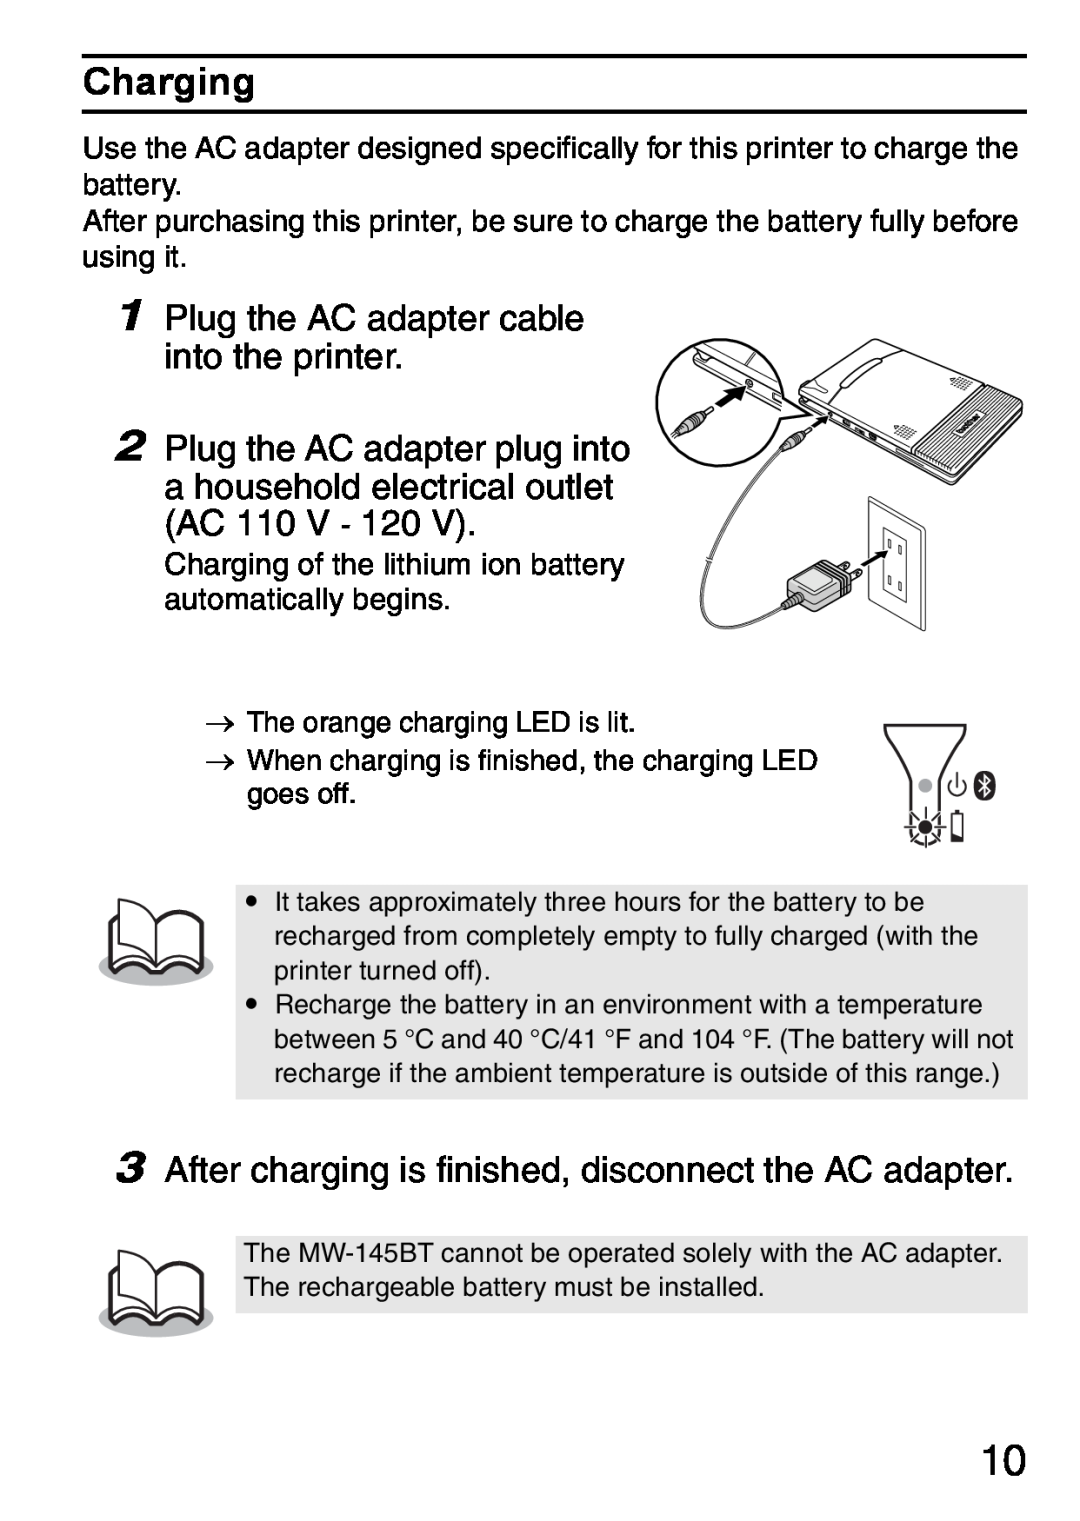 Brother MW-145BT manual Charging, Plug the AC adapter cable into the printer, Plug the AC adapter plug into 